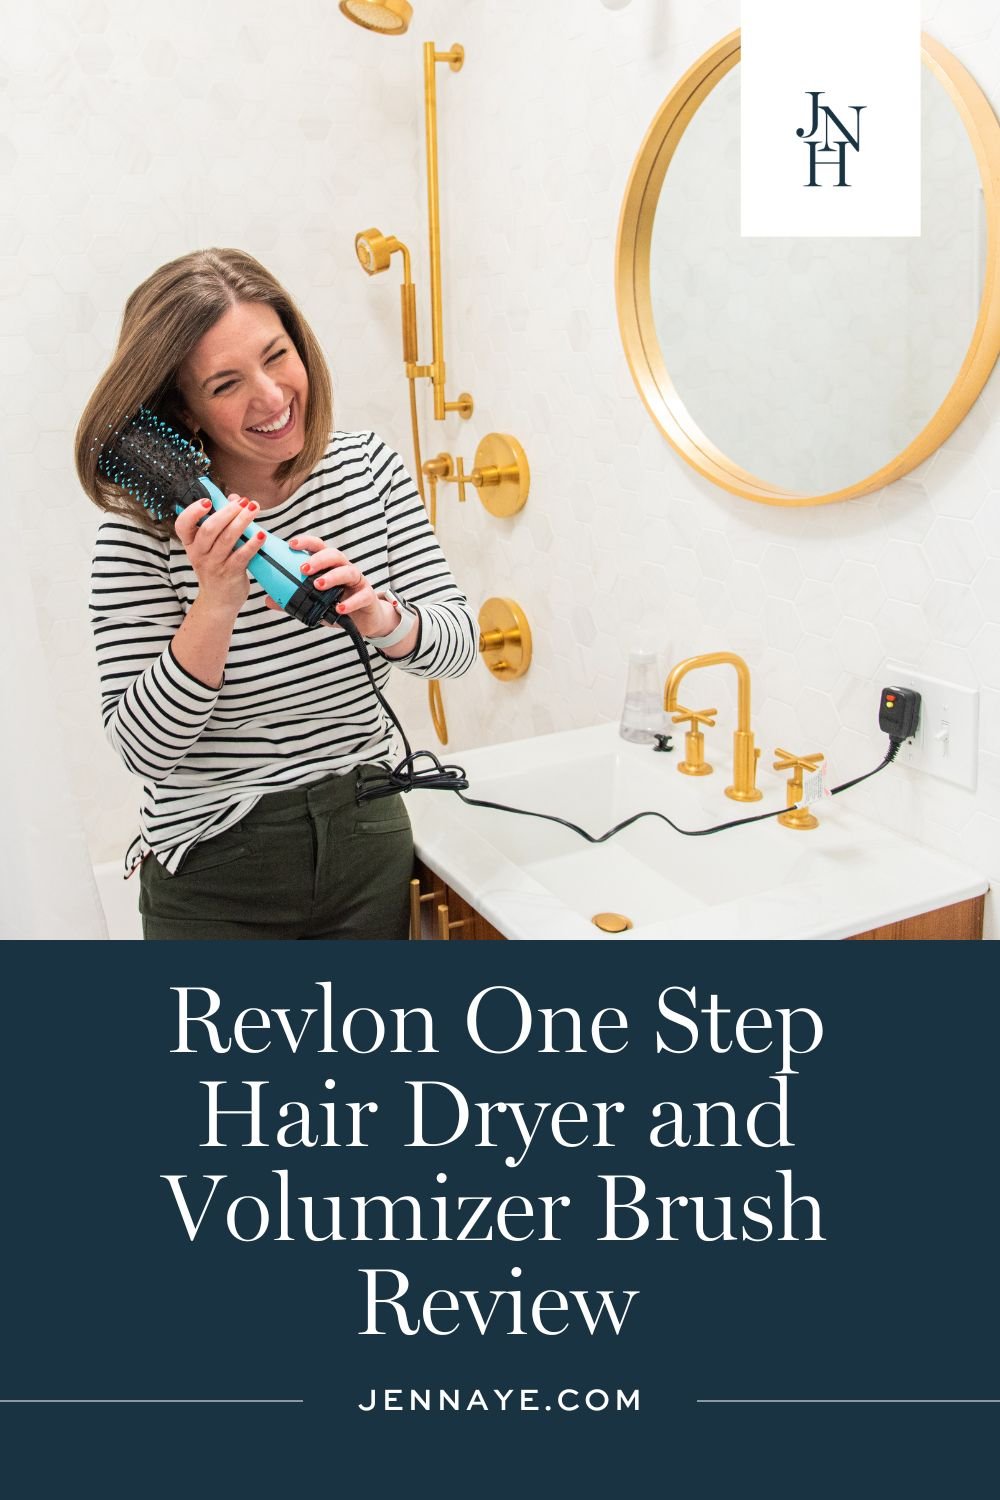 An Honest Review of the Revlon One Step Hair Dryer